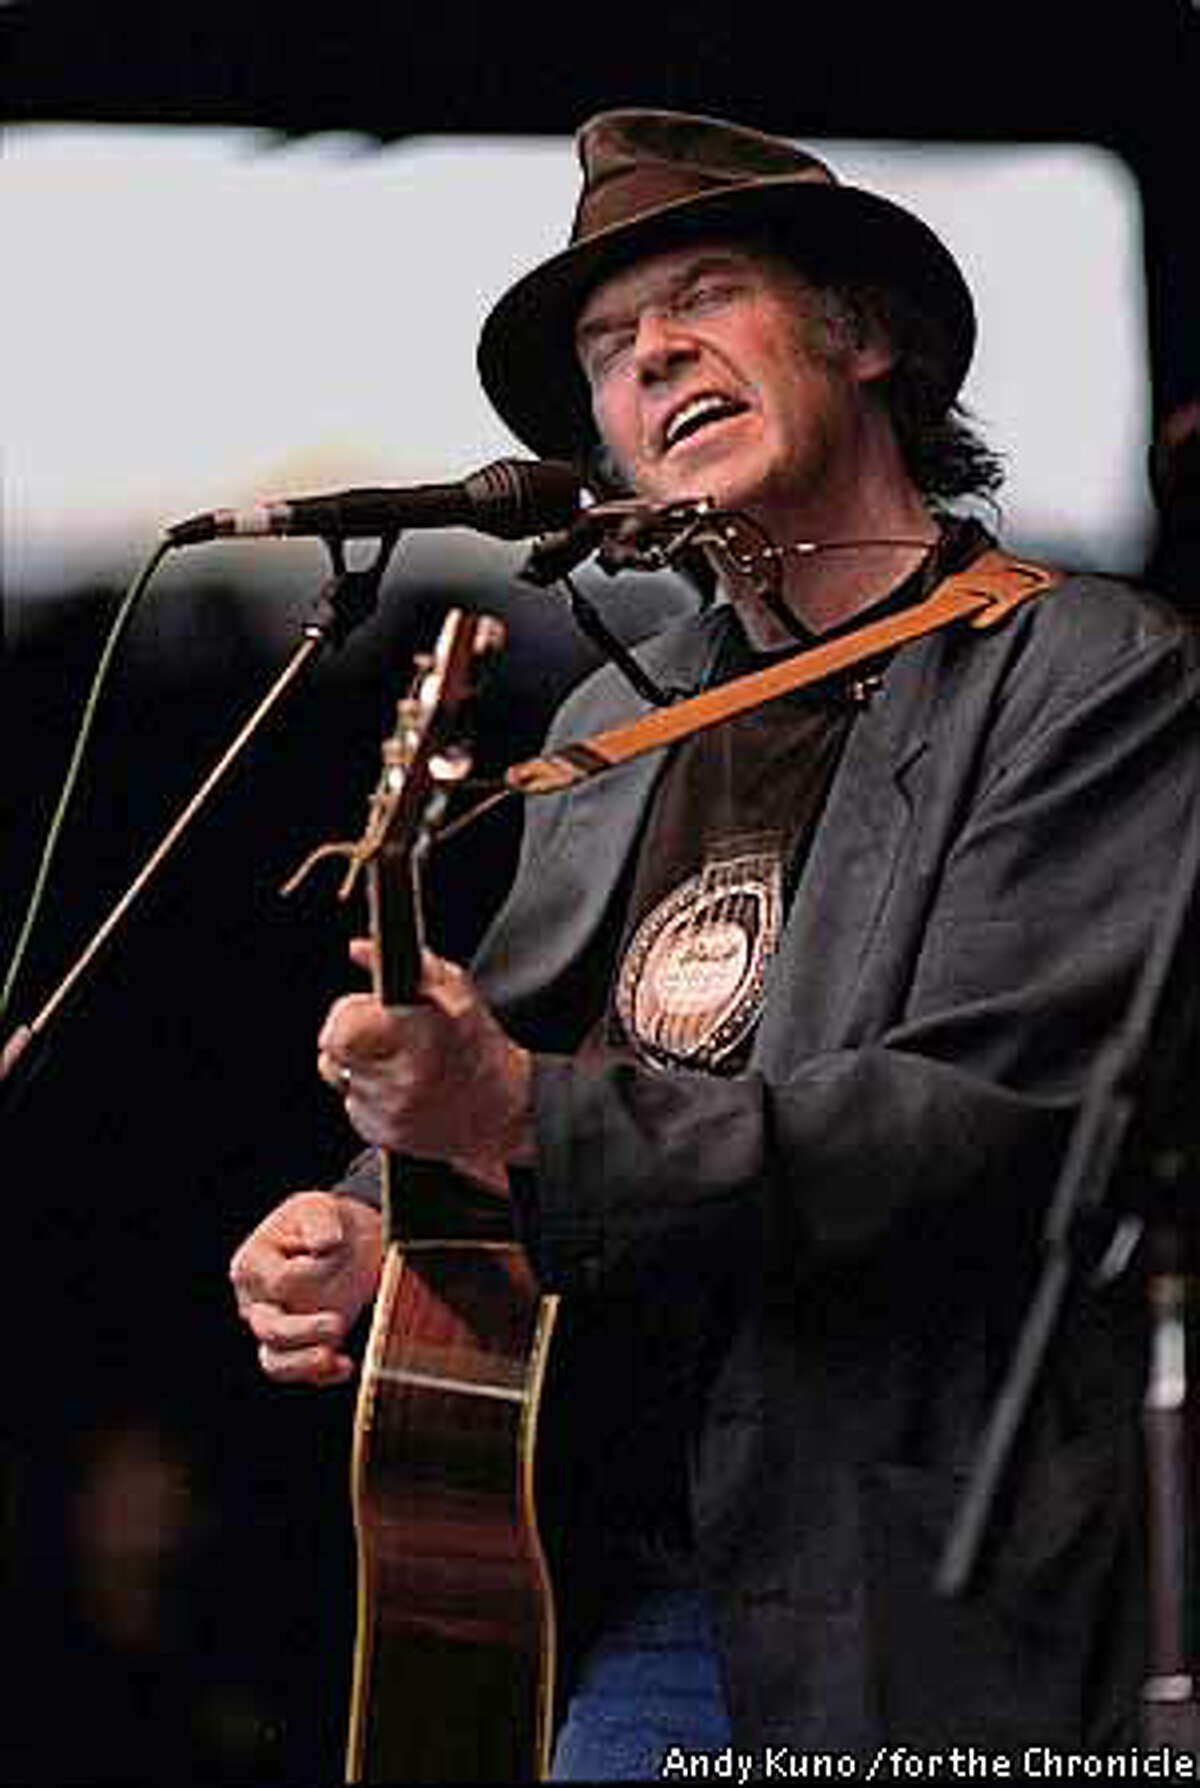 Benefit organizer Neil Young sang several songs splendidly. Photo by Andy Kuno for the Chronicle